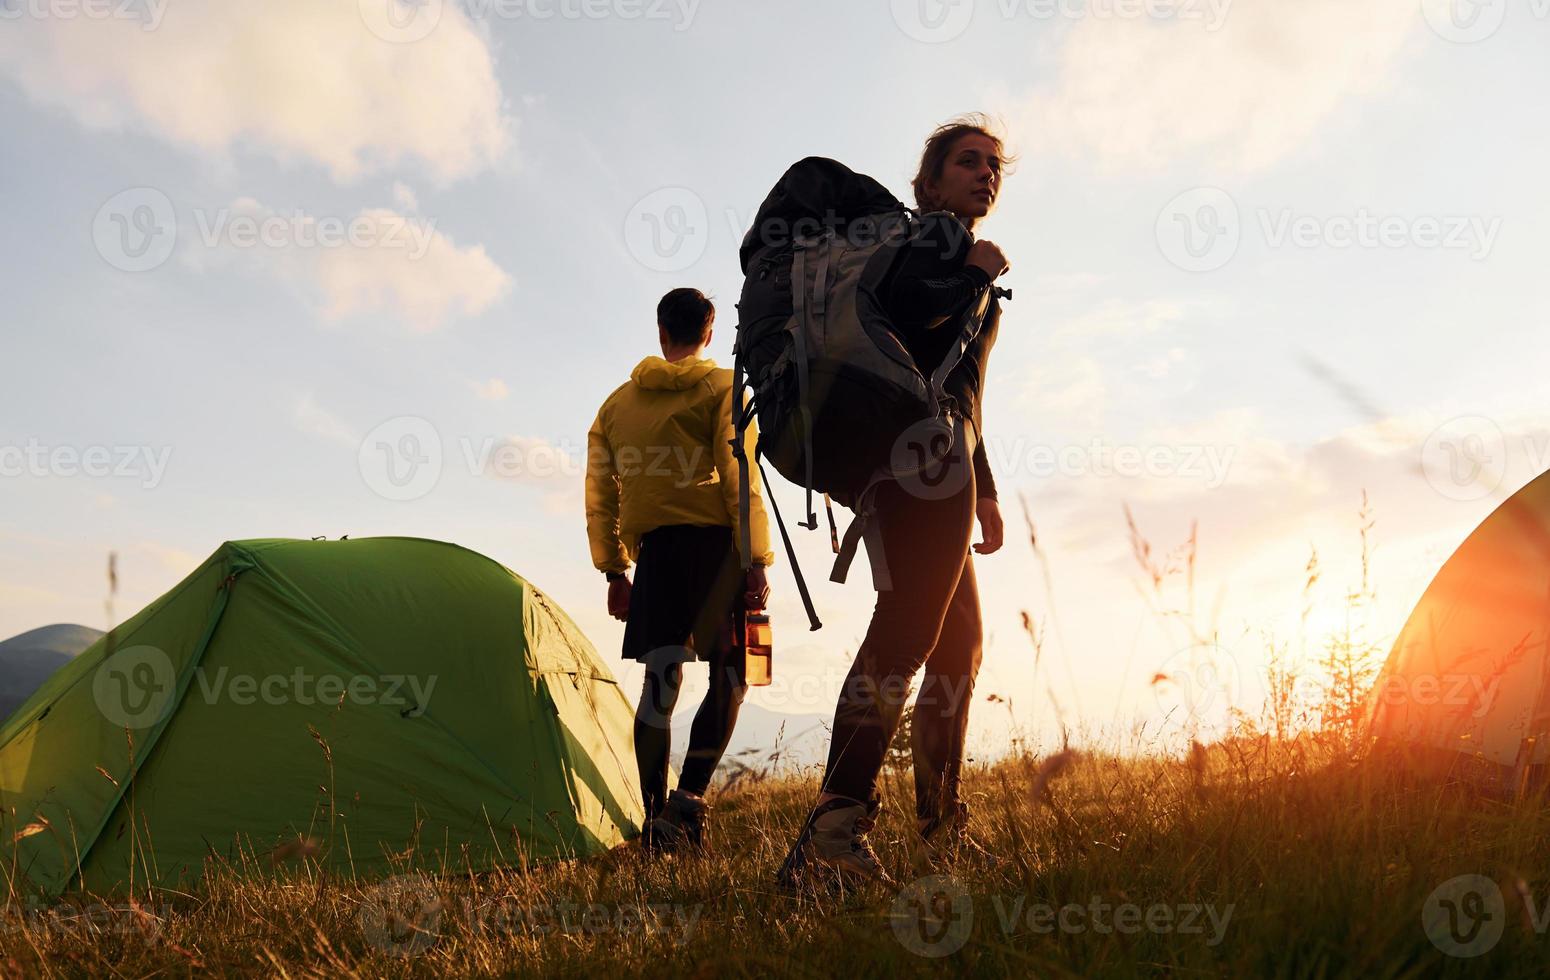 Couple having a walk outdoors near green tent. Conception of traveling photo